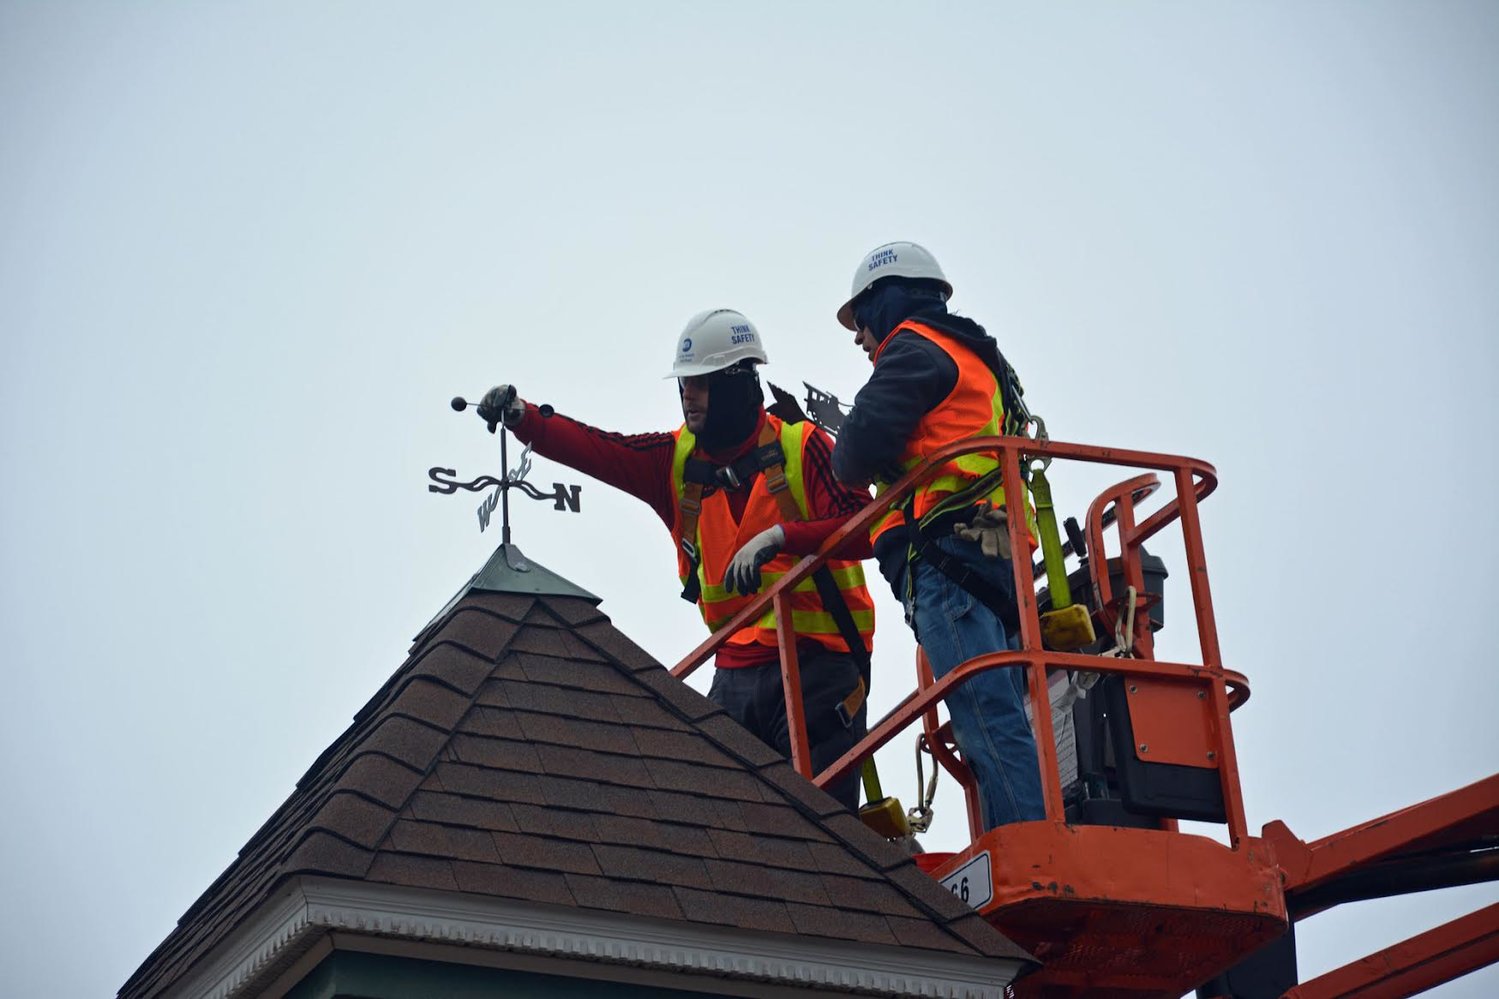 The LIRR structures department crew installing the new weathervane.